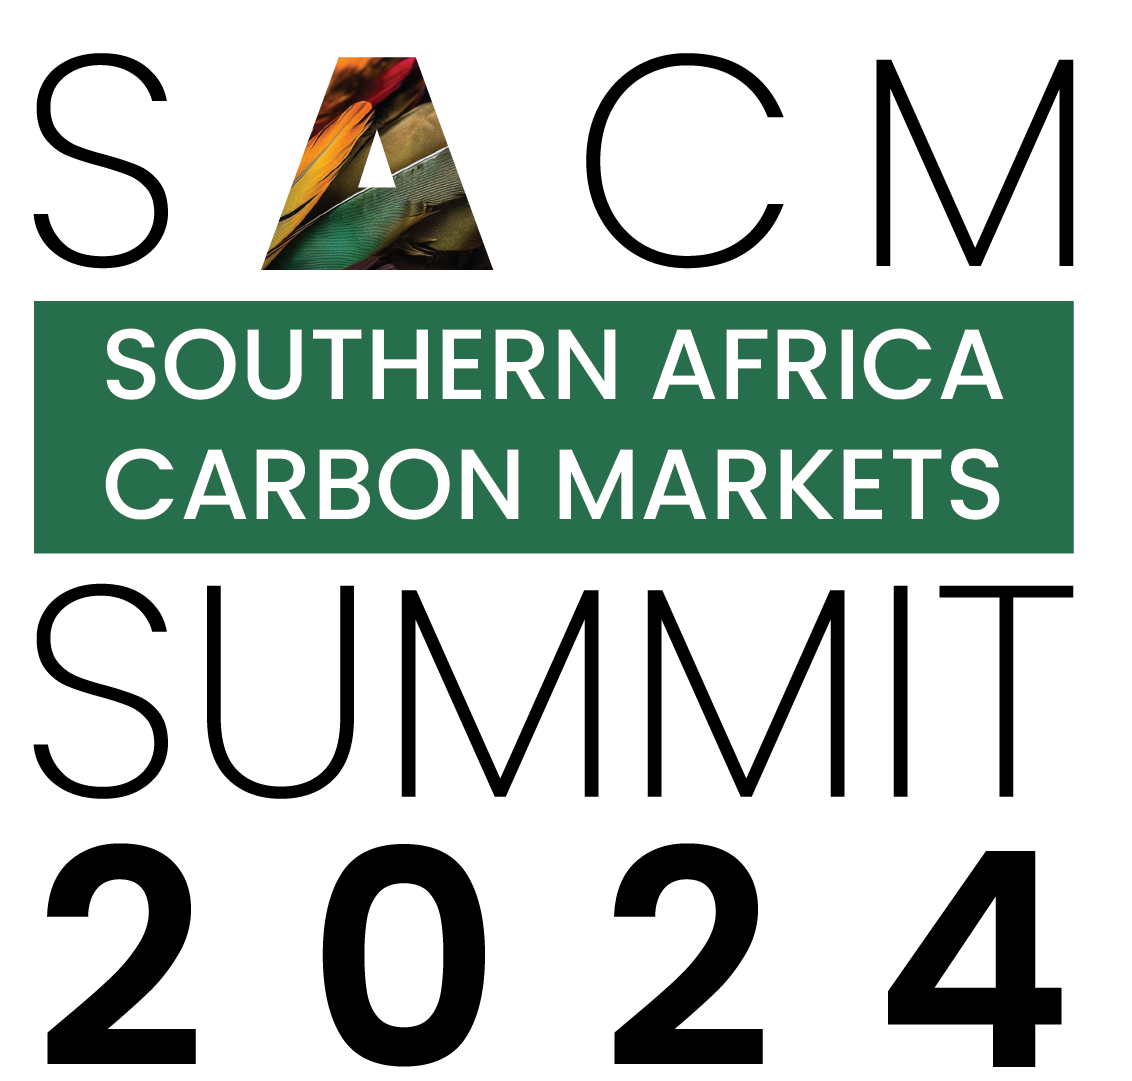 Southern Africa Carbon Markets Summit